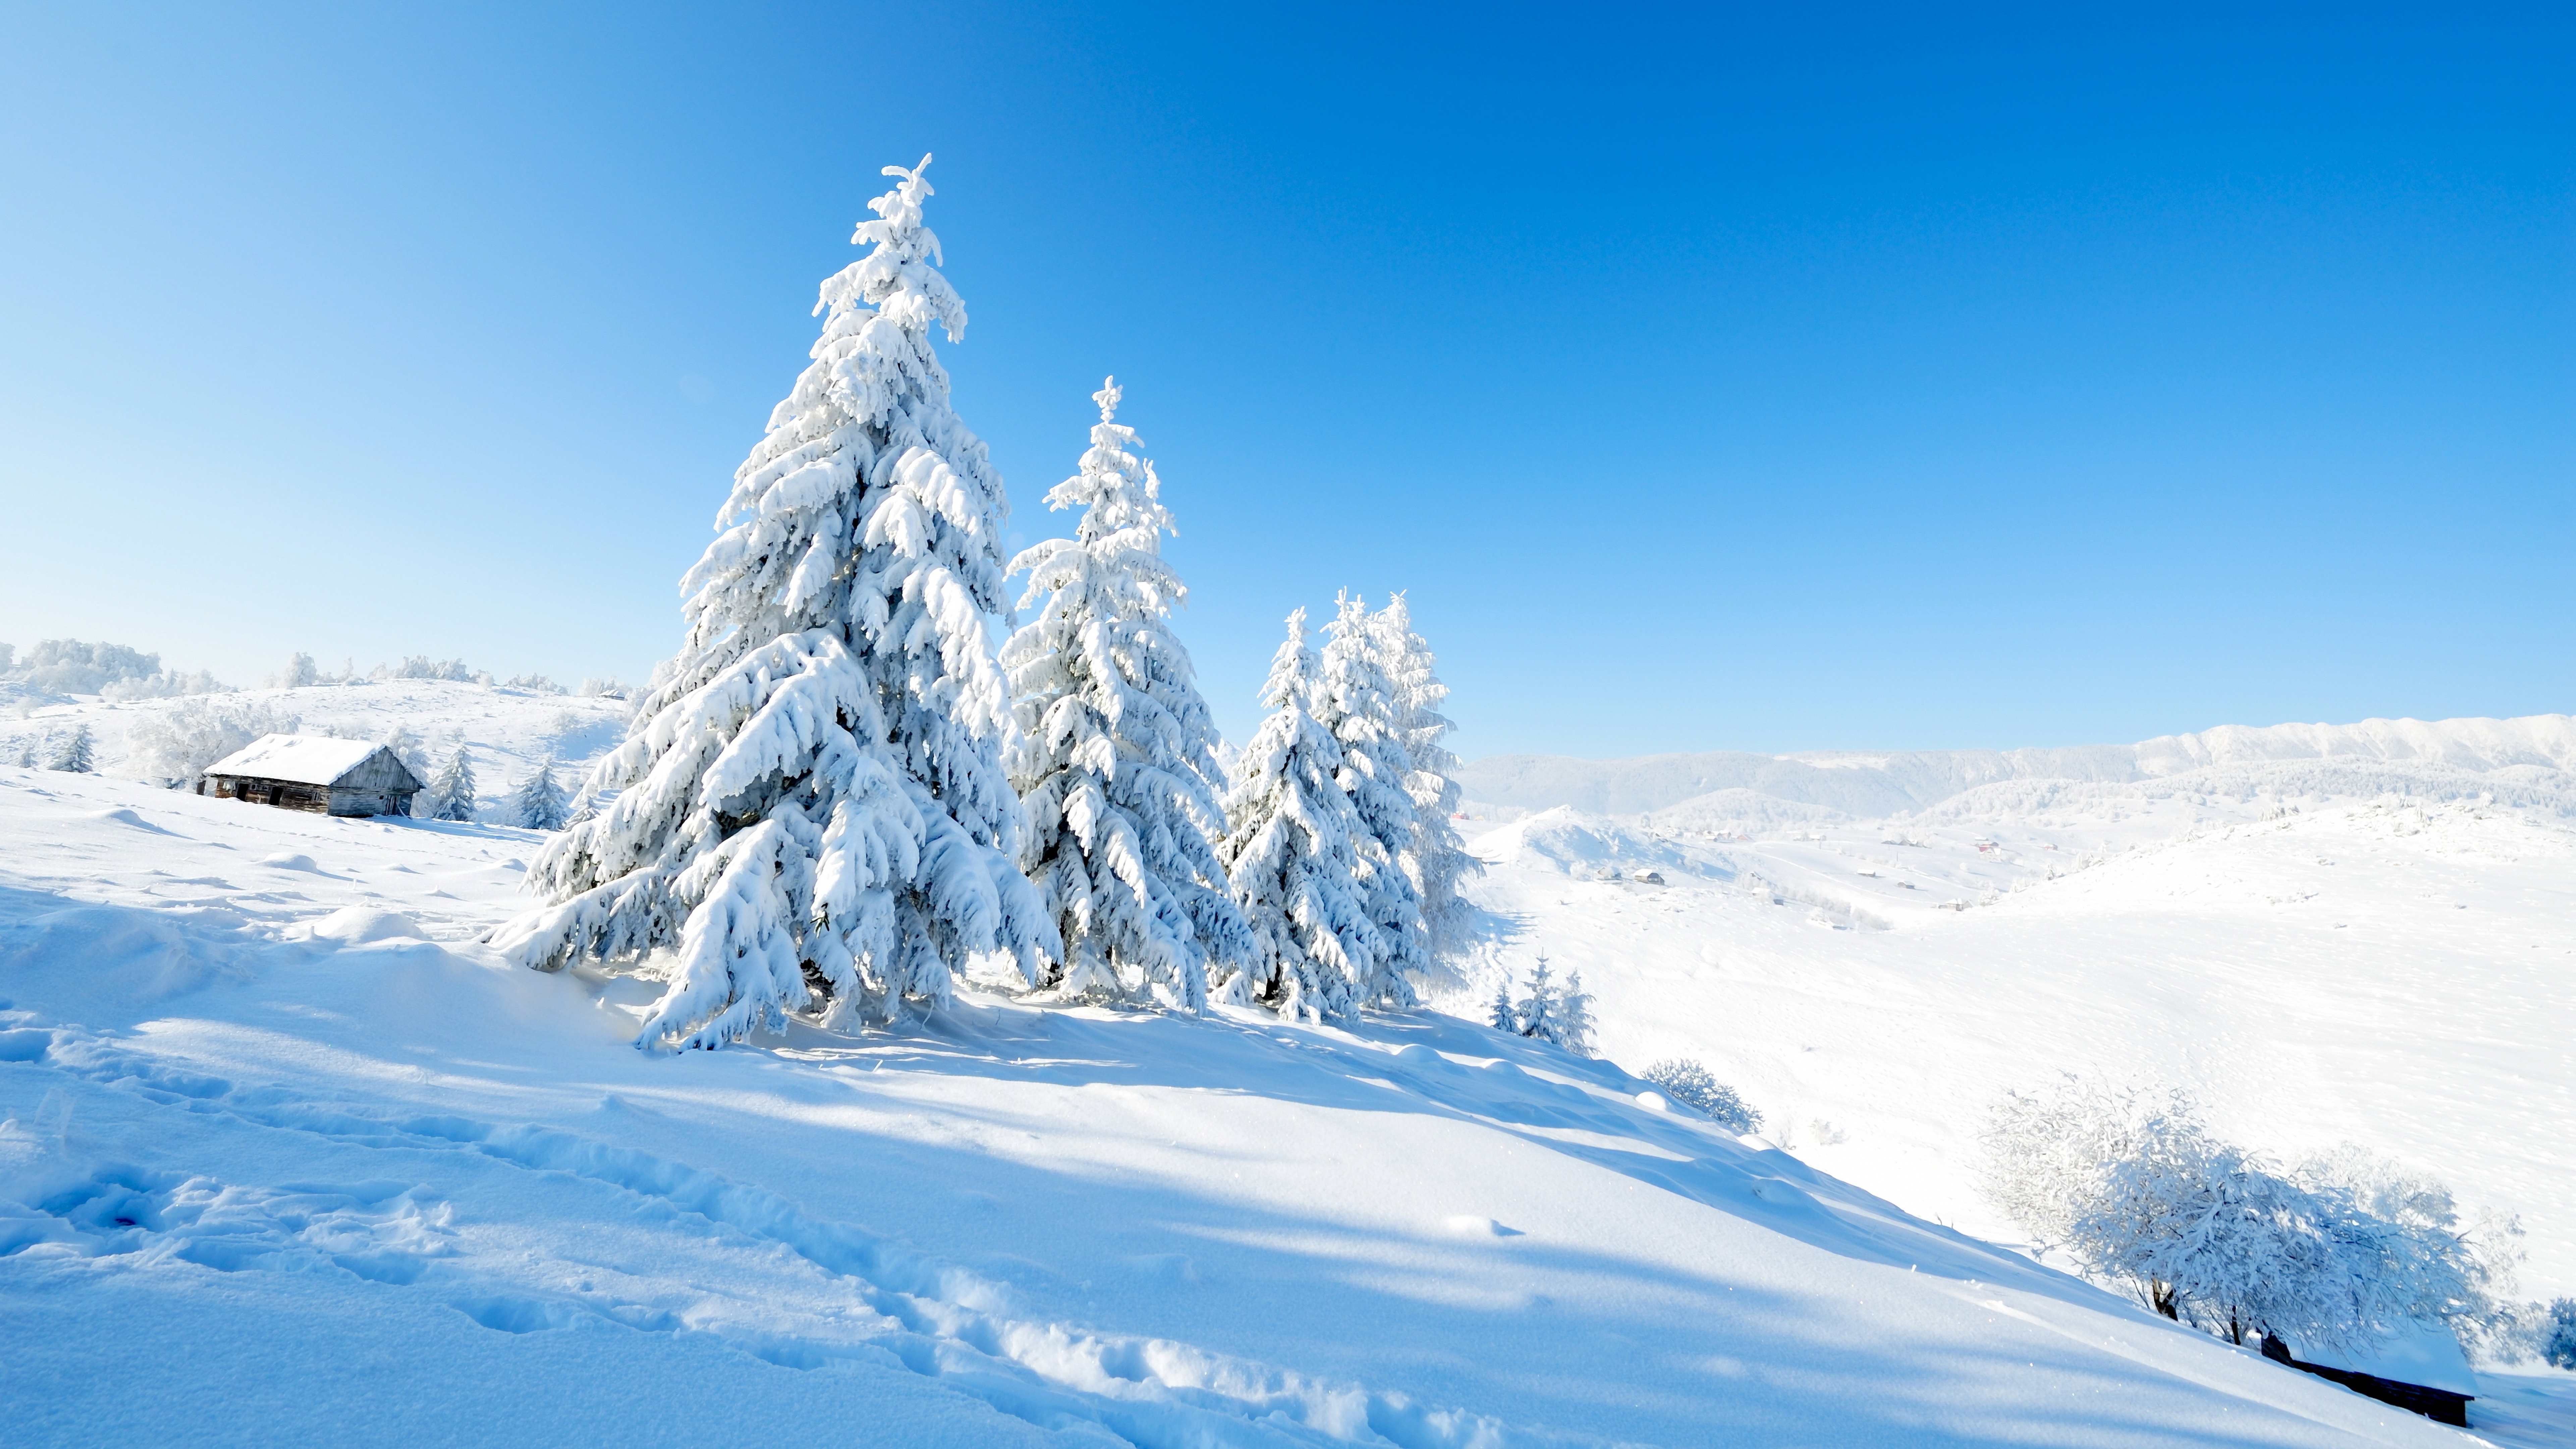 Snow Covered Pine Trees on Snow Covered Ground Under Blue Sky During Daytime. Wallpaper in 7680x4320 Resolution